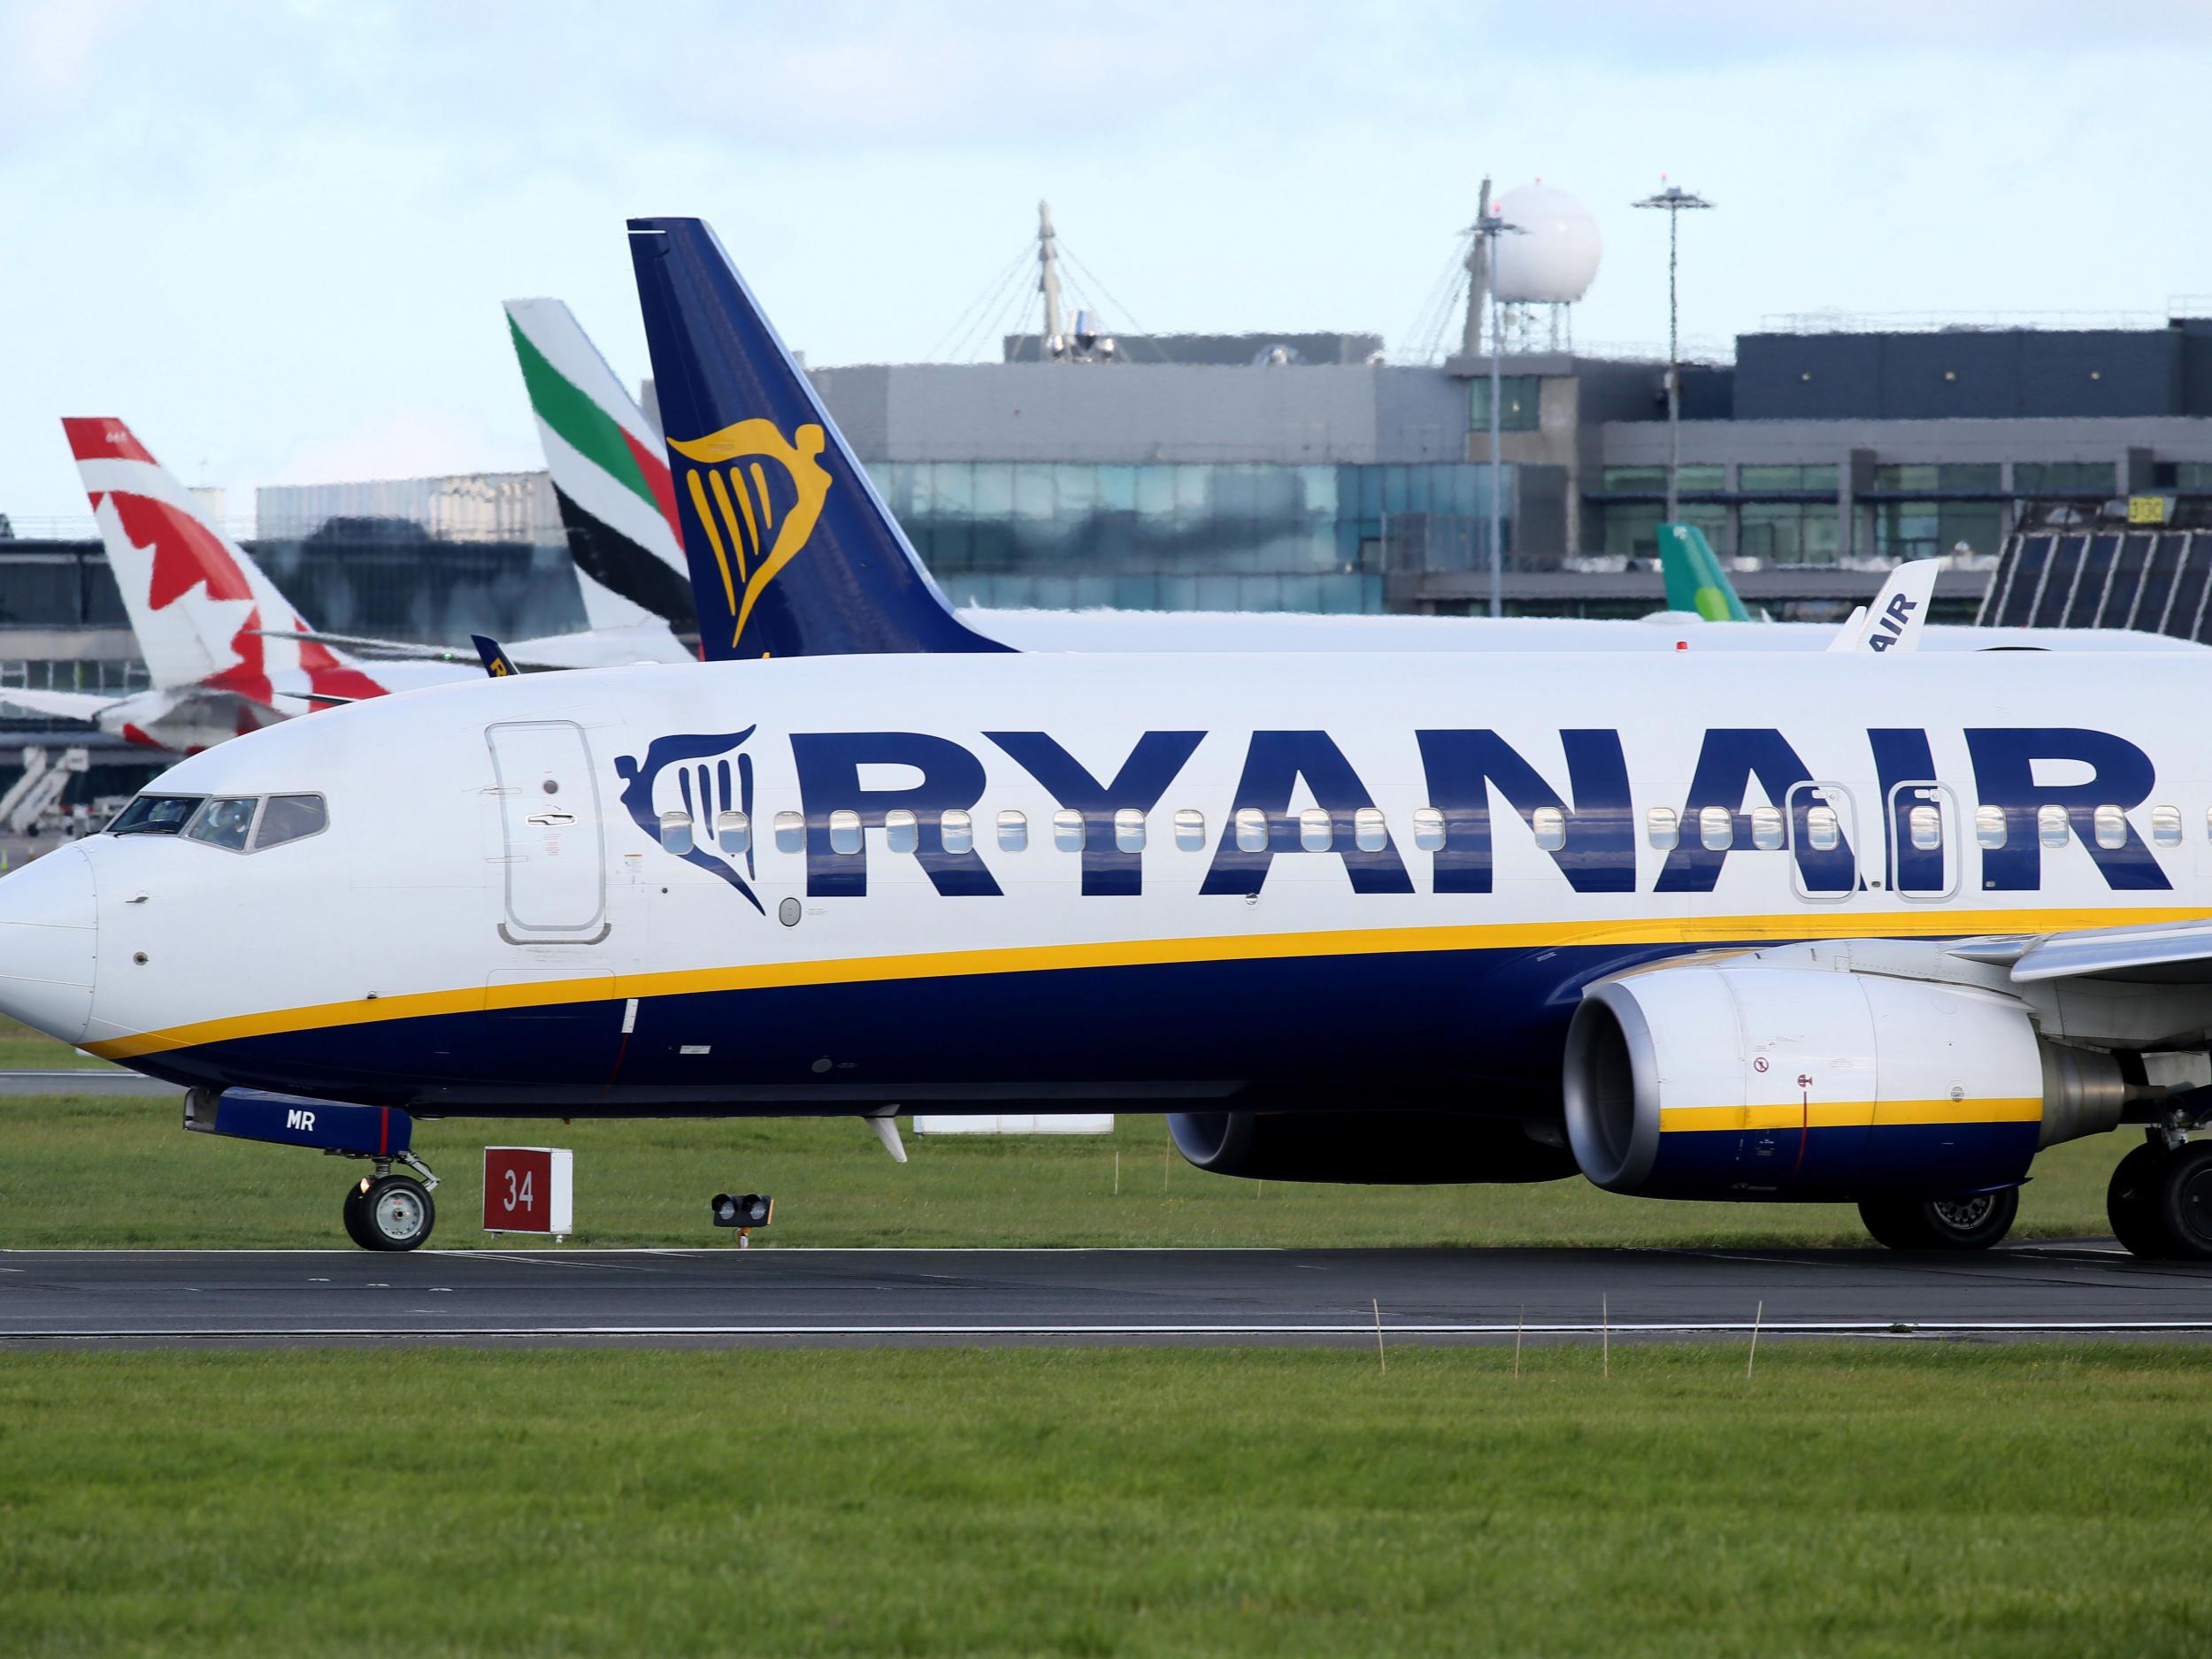 ‘Christmas flights are very important to our customers,’ said CEO Michael O’Leary